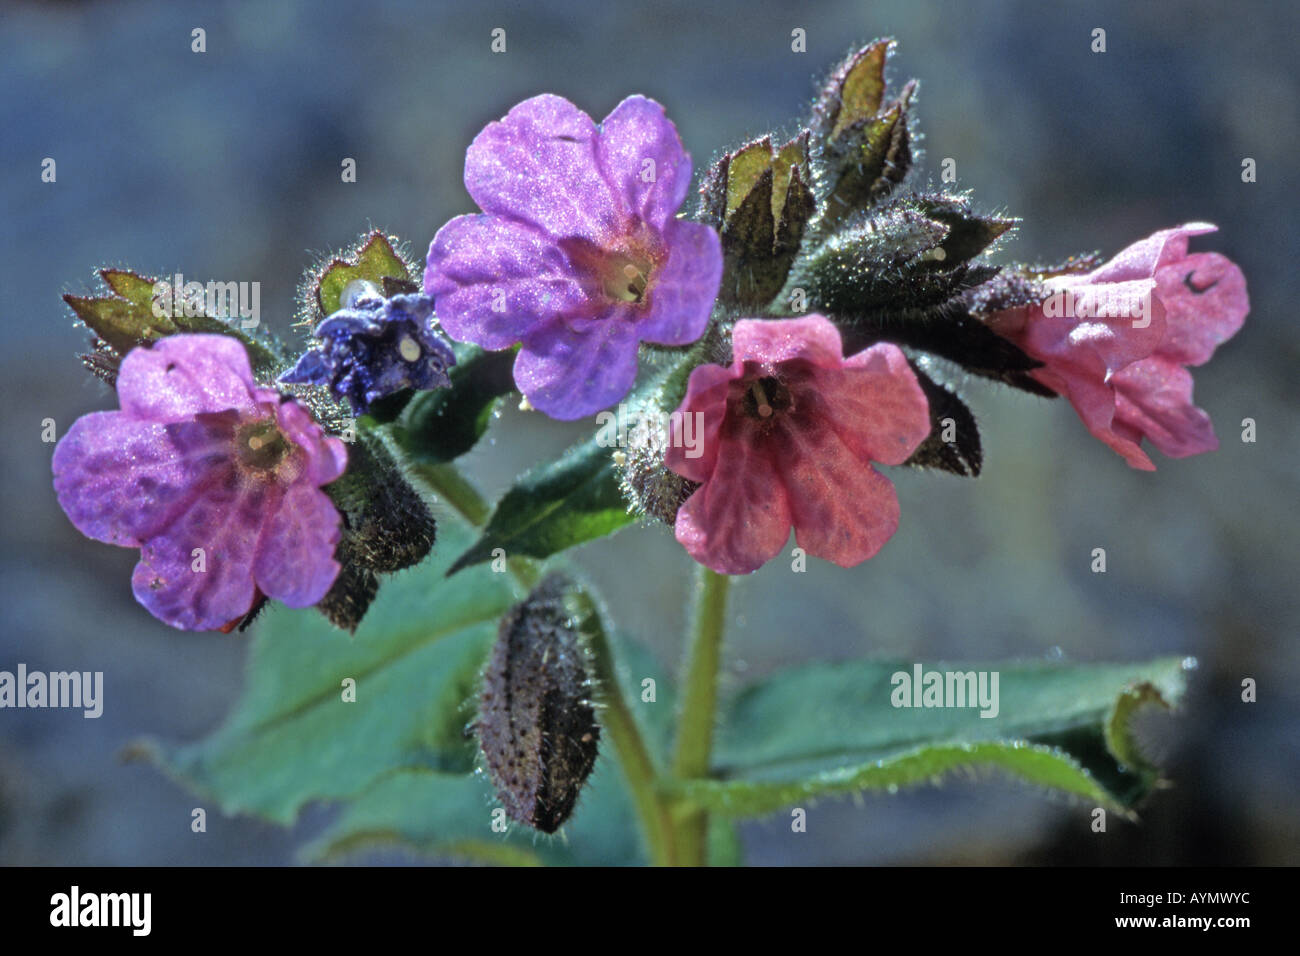 Jerusalem Cowslip, Lungwort, Soldiers and Sailors, Spotted Dog (Pulmonaria officinalis), flowers Stock Photo